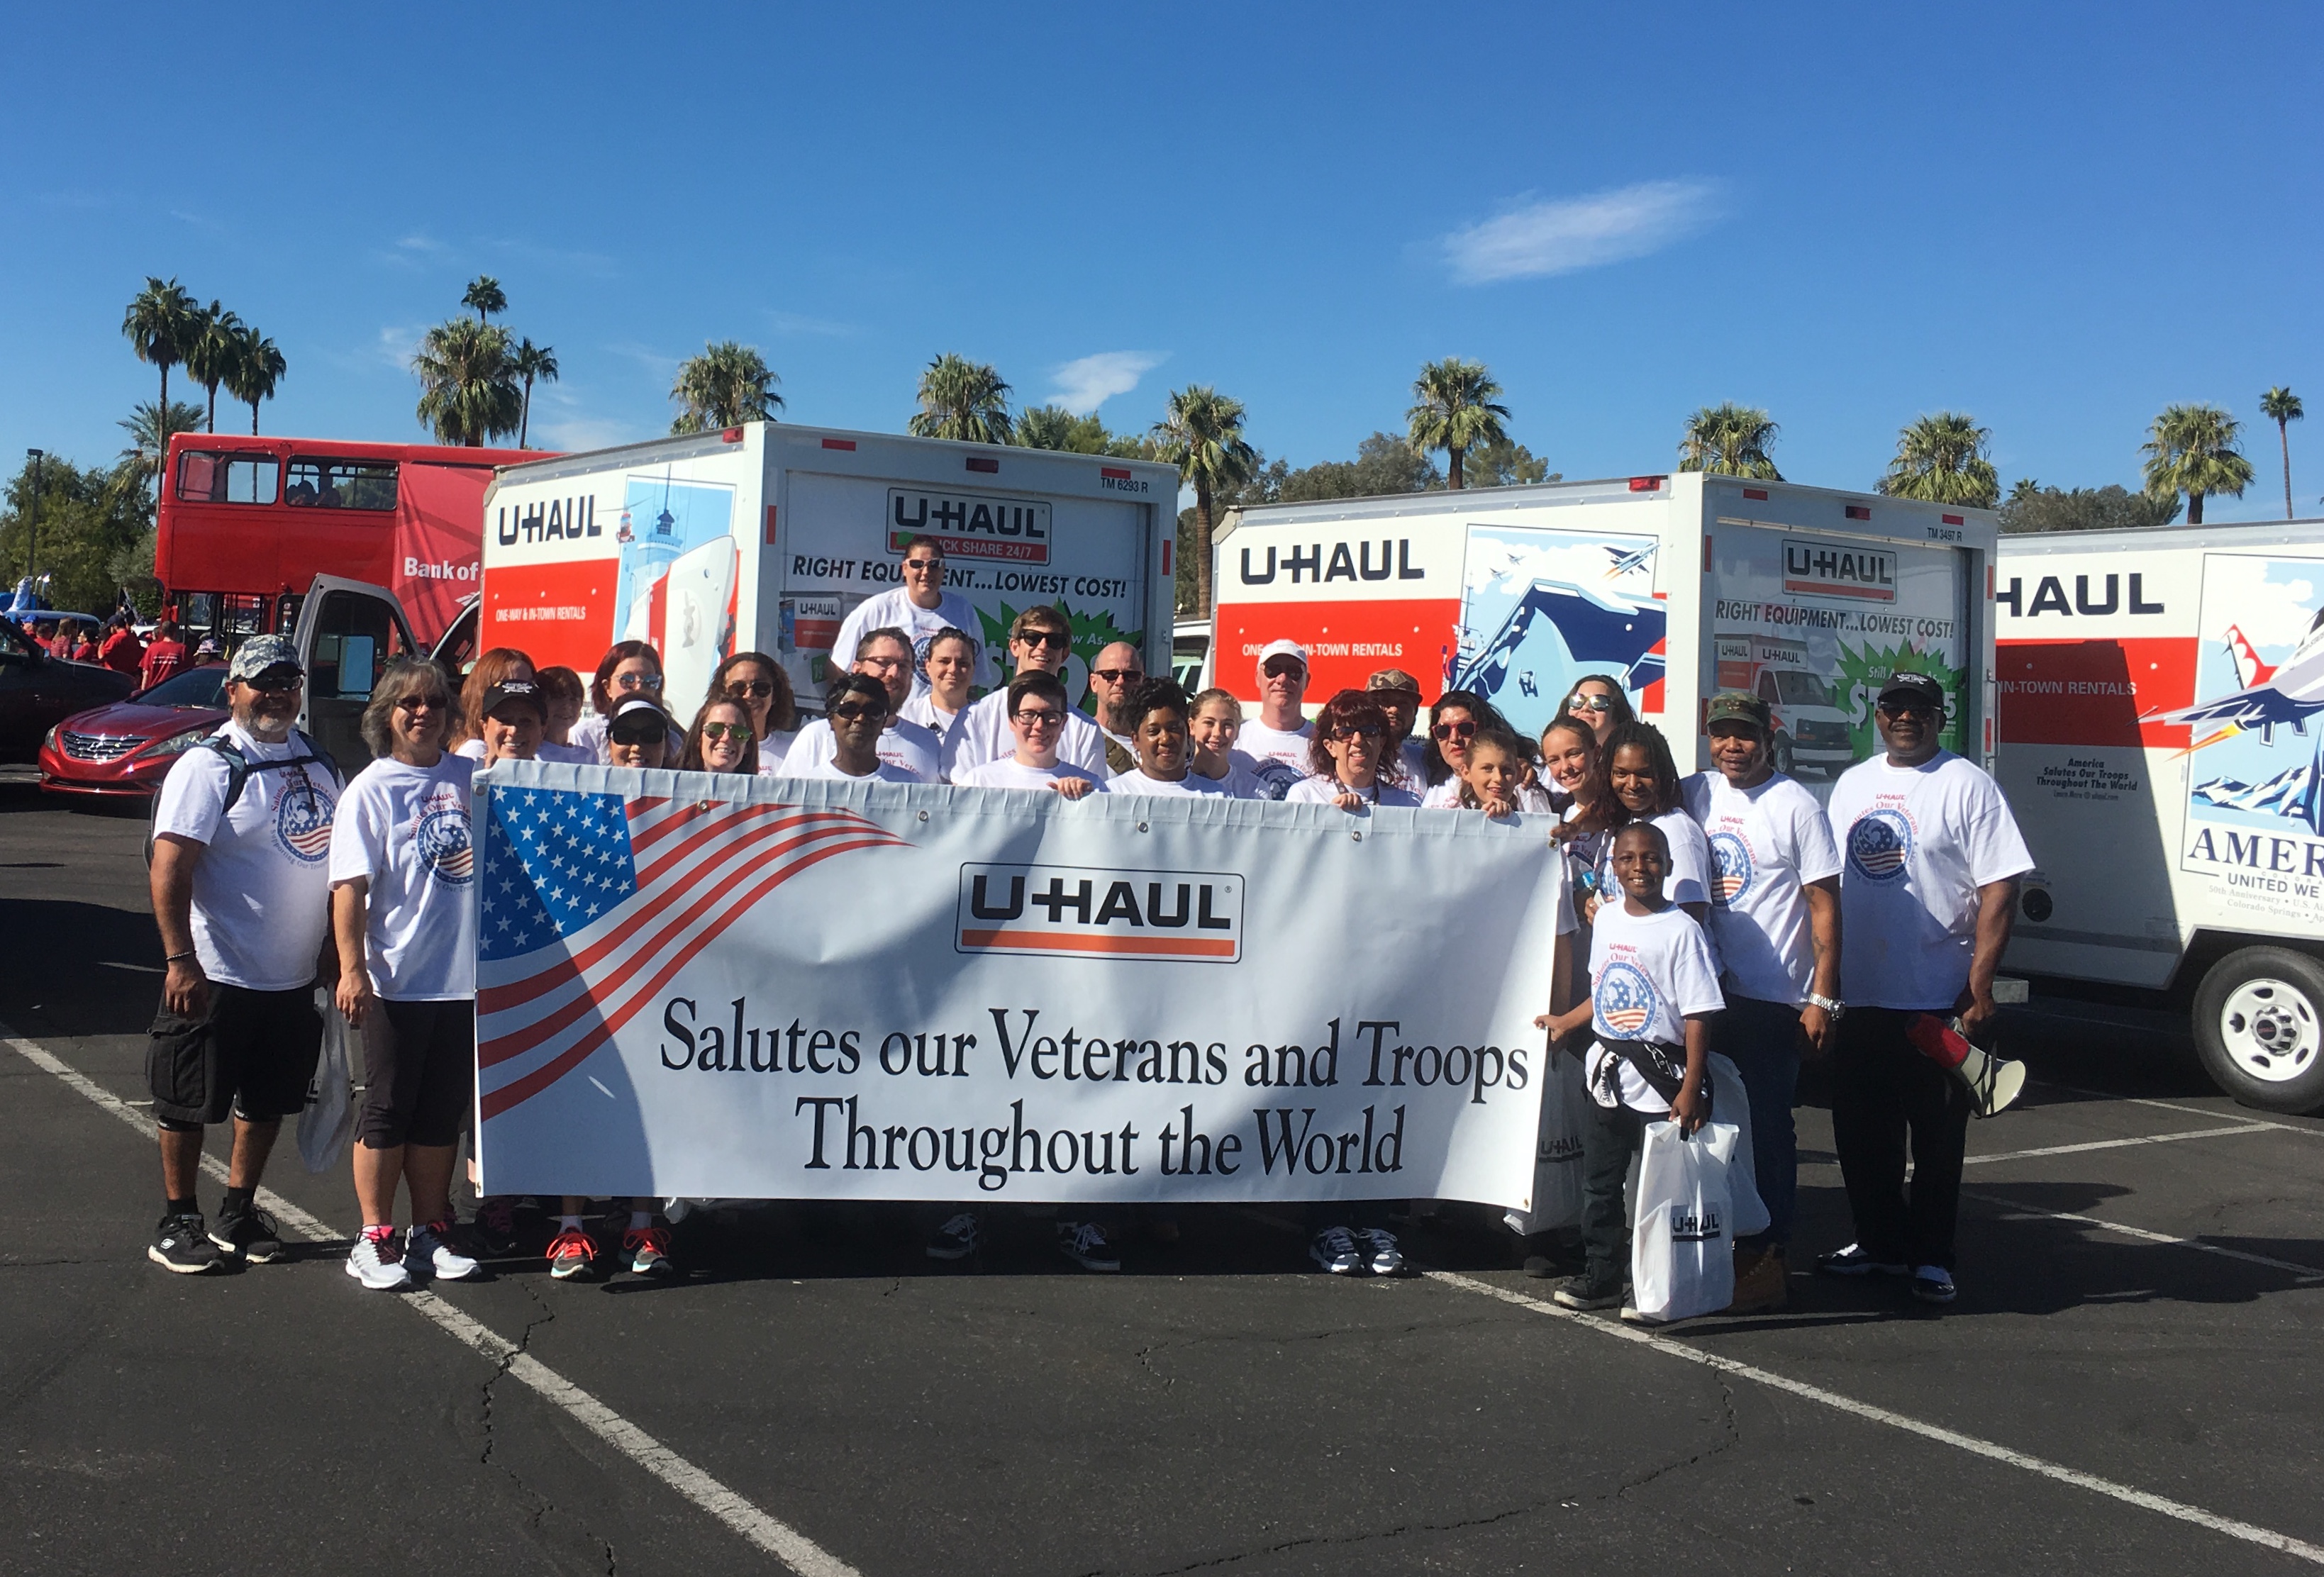 U-Haul Team Members and their families extended their warmest thanks in the form of handshakes and triumphant waves over three miles of Phoenix streets on Nov. 11 at the 2017 Veterans Day Parade.